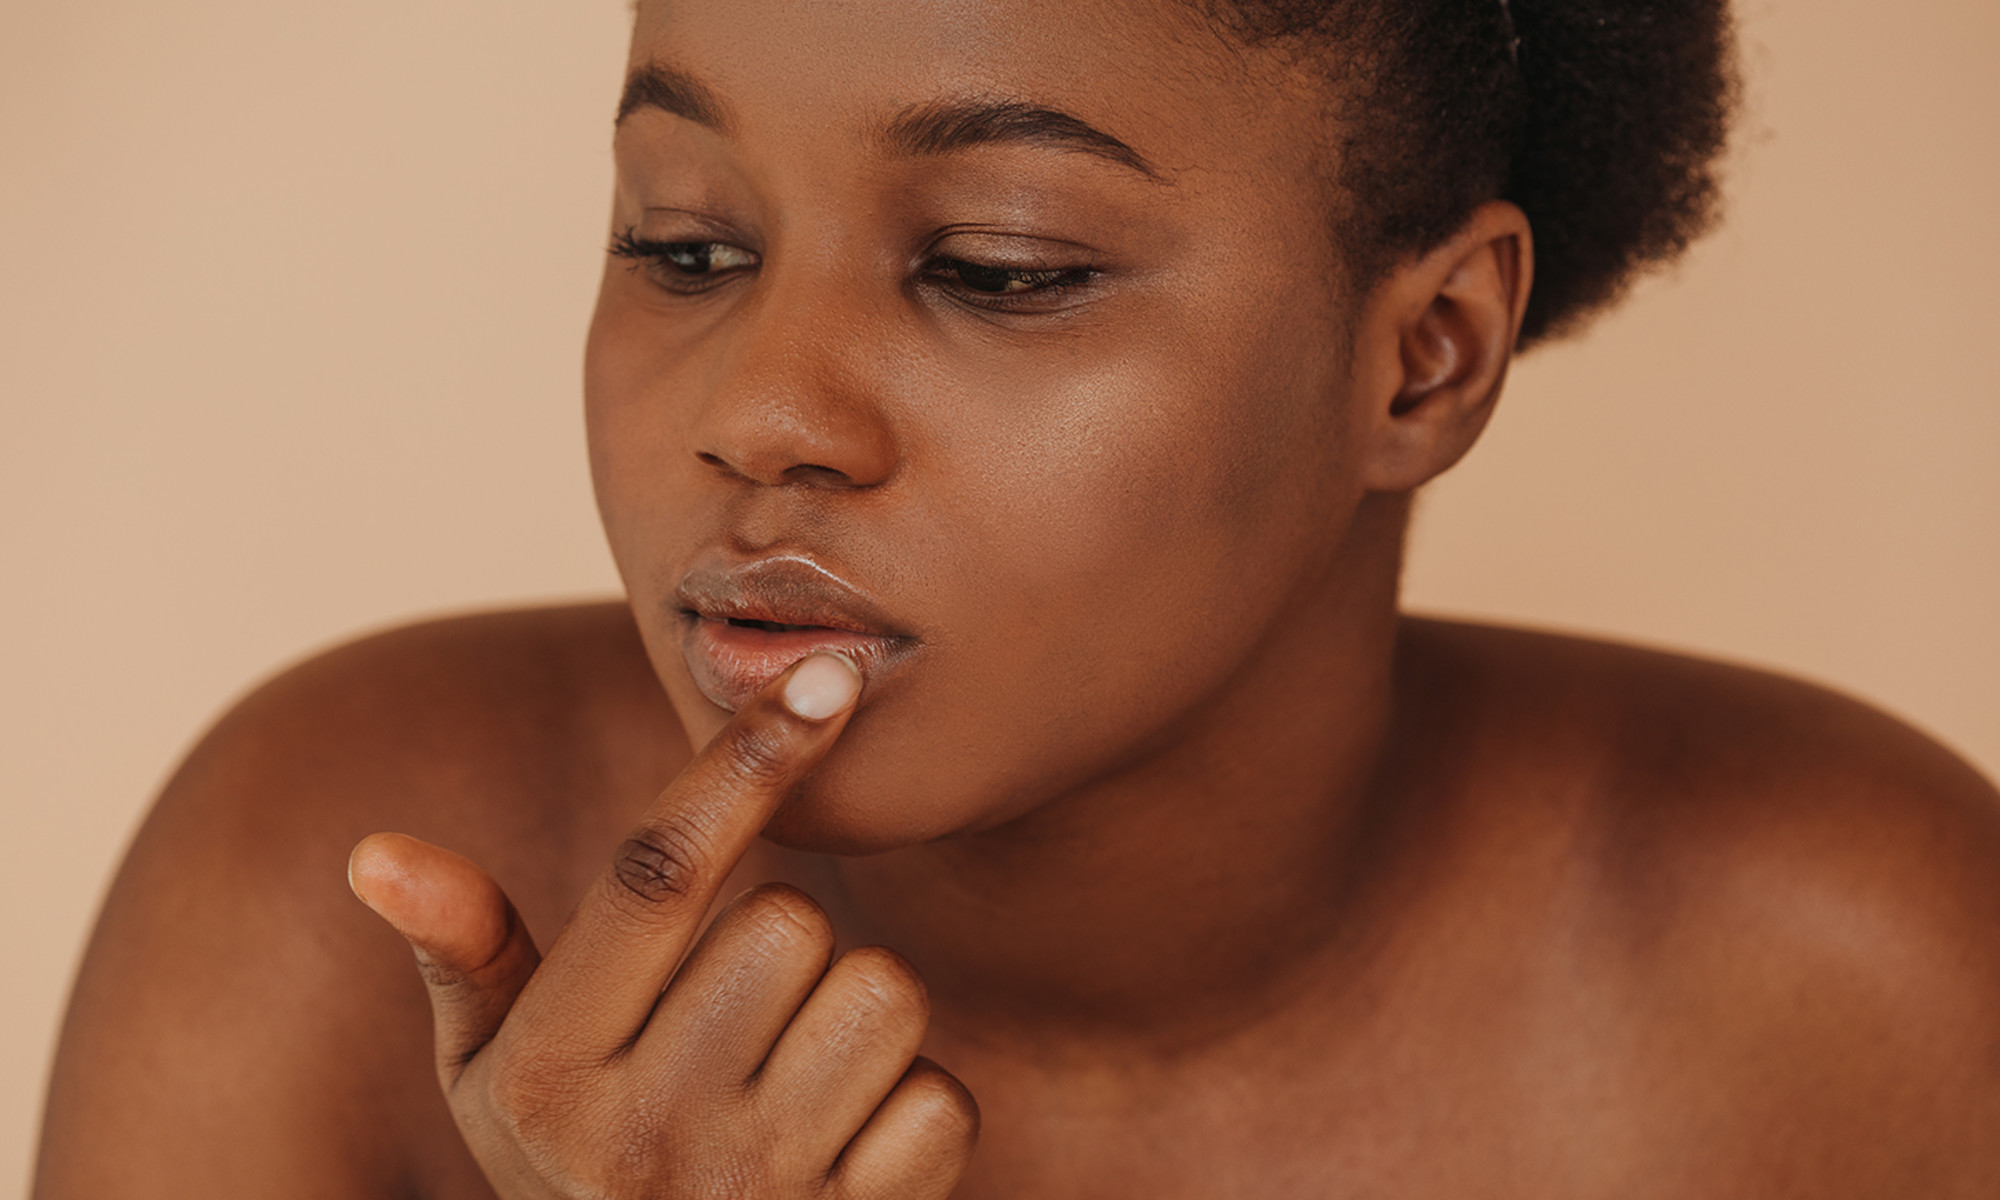 The Lip Balm These Holistic Derms & MDs Swear By & Why